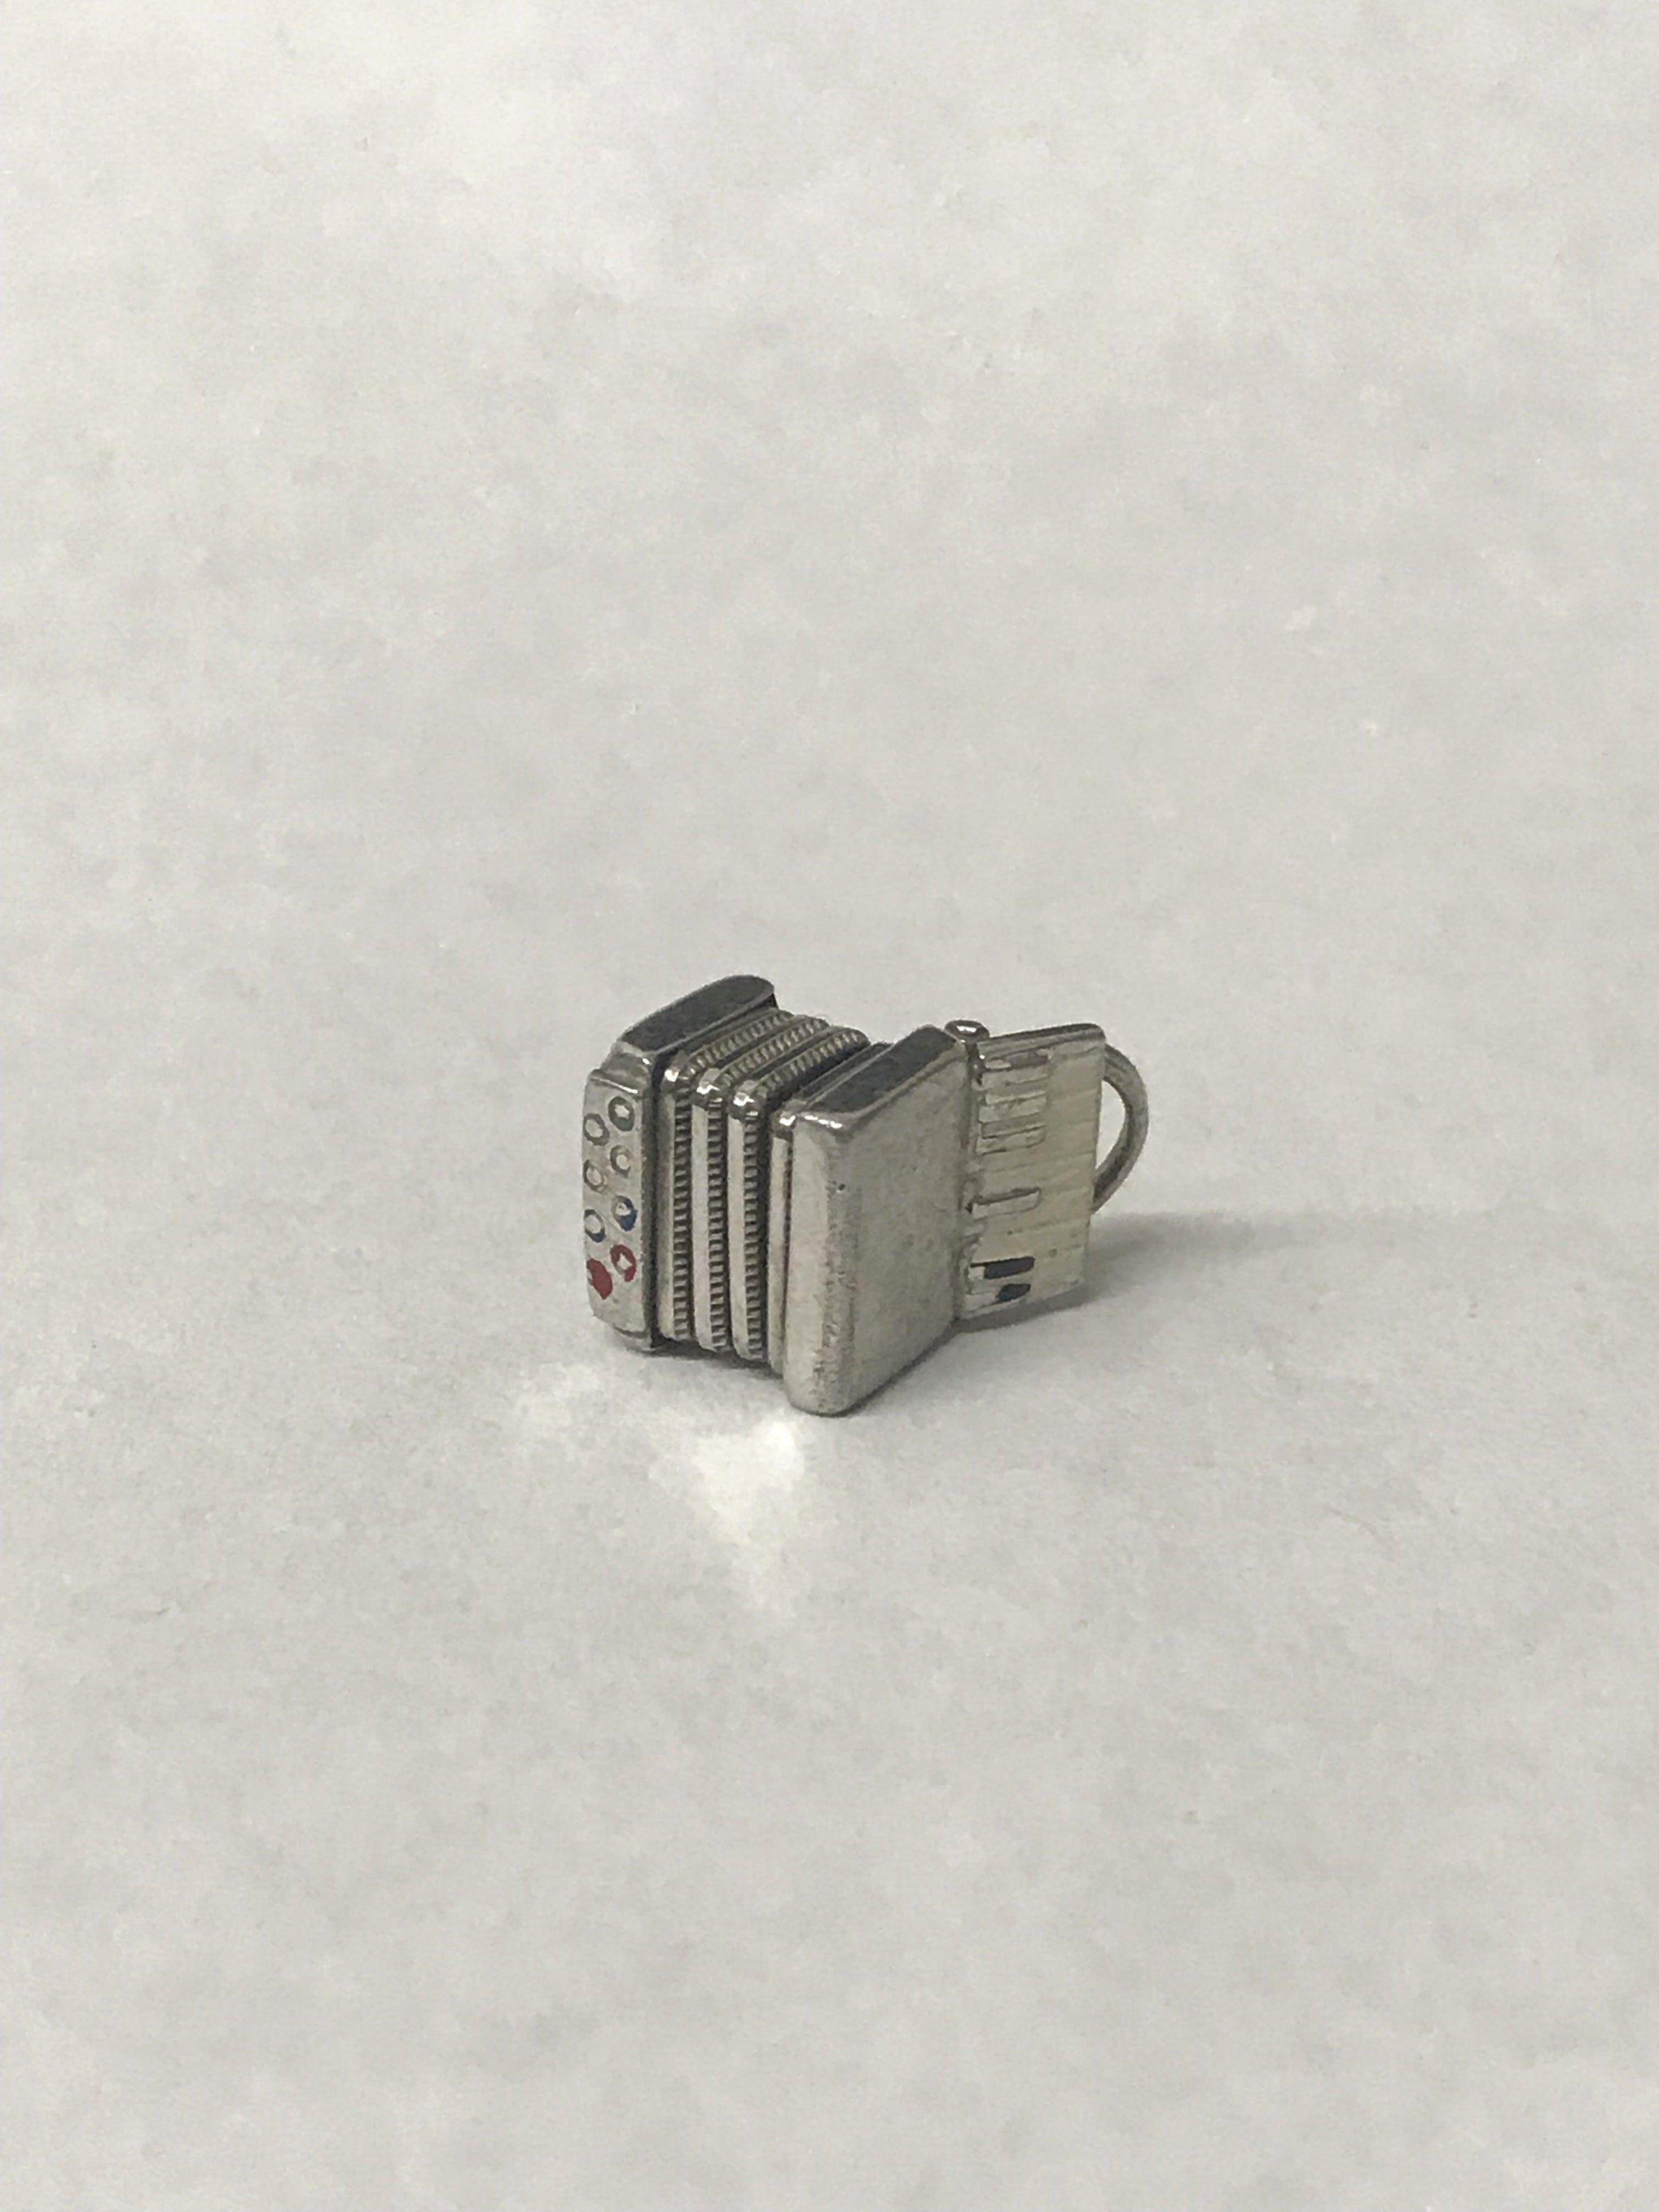 Vintage Squeeze Box Accordion Sterling Silver Charm - Hers and His Treasures